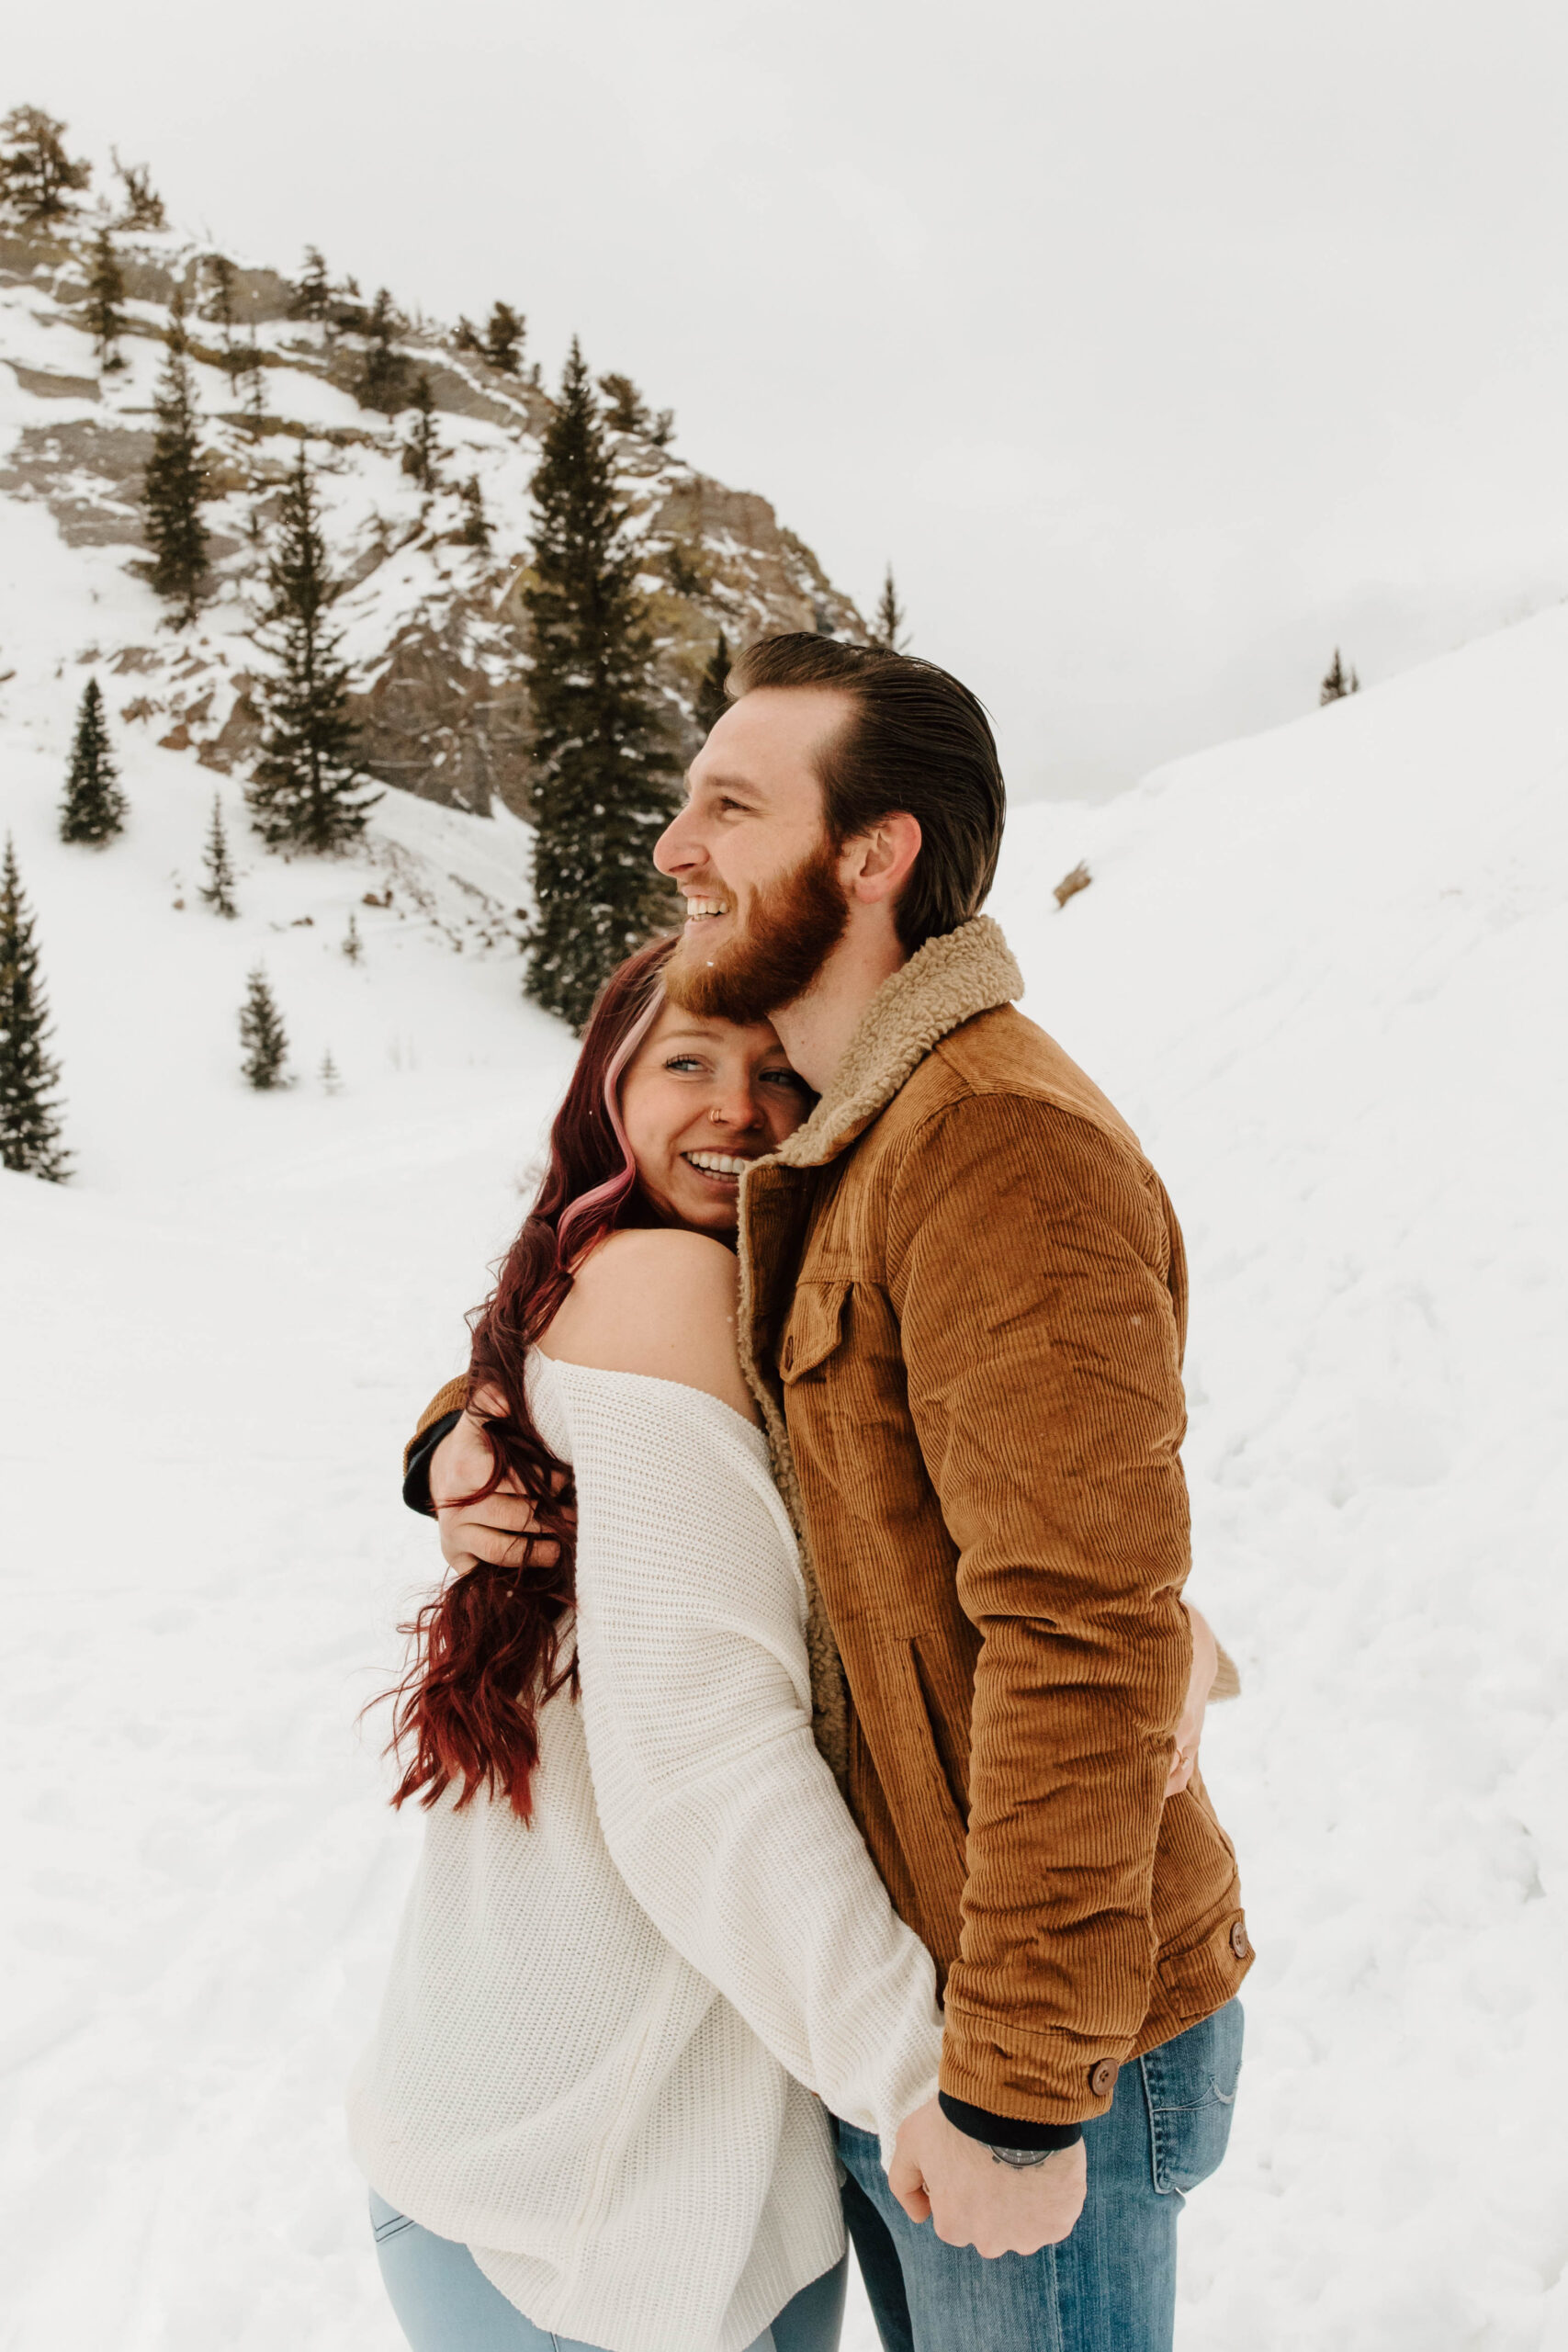 couple embraces, they both are laughing. there is snow falling over them and the mountains